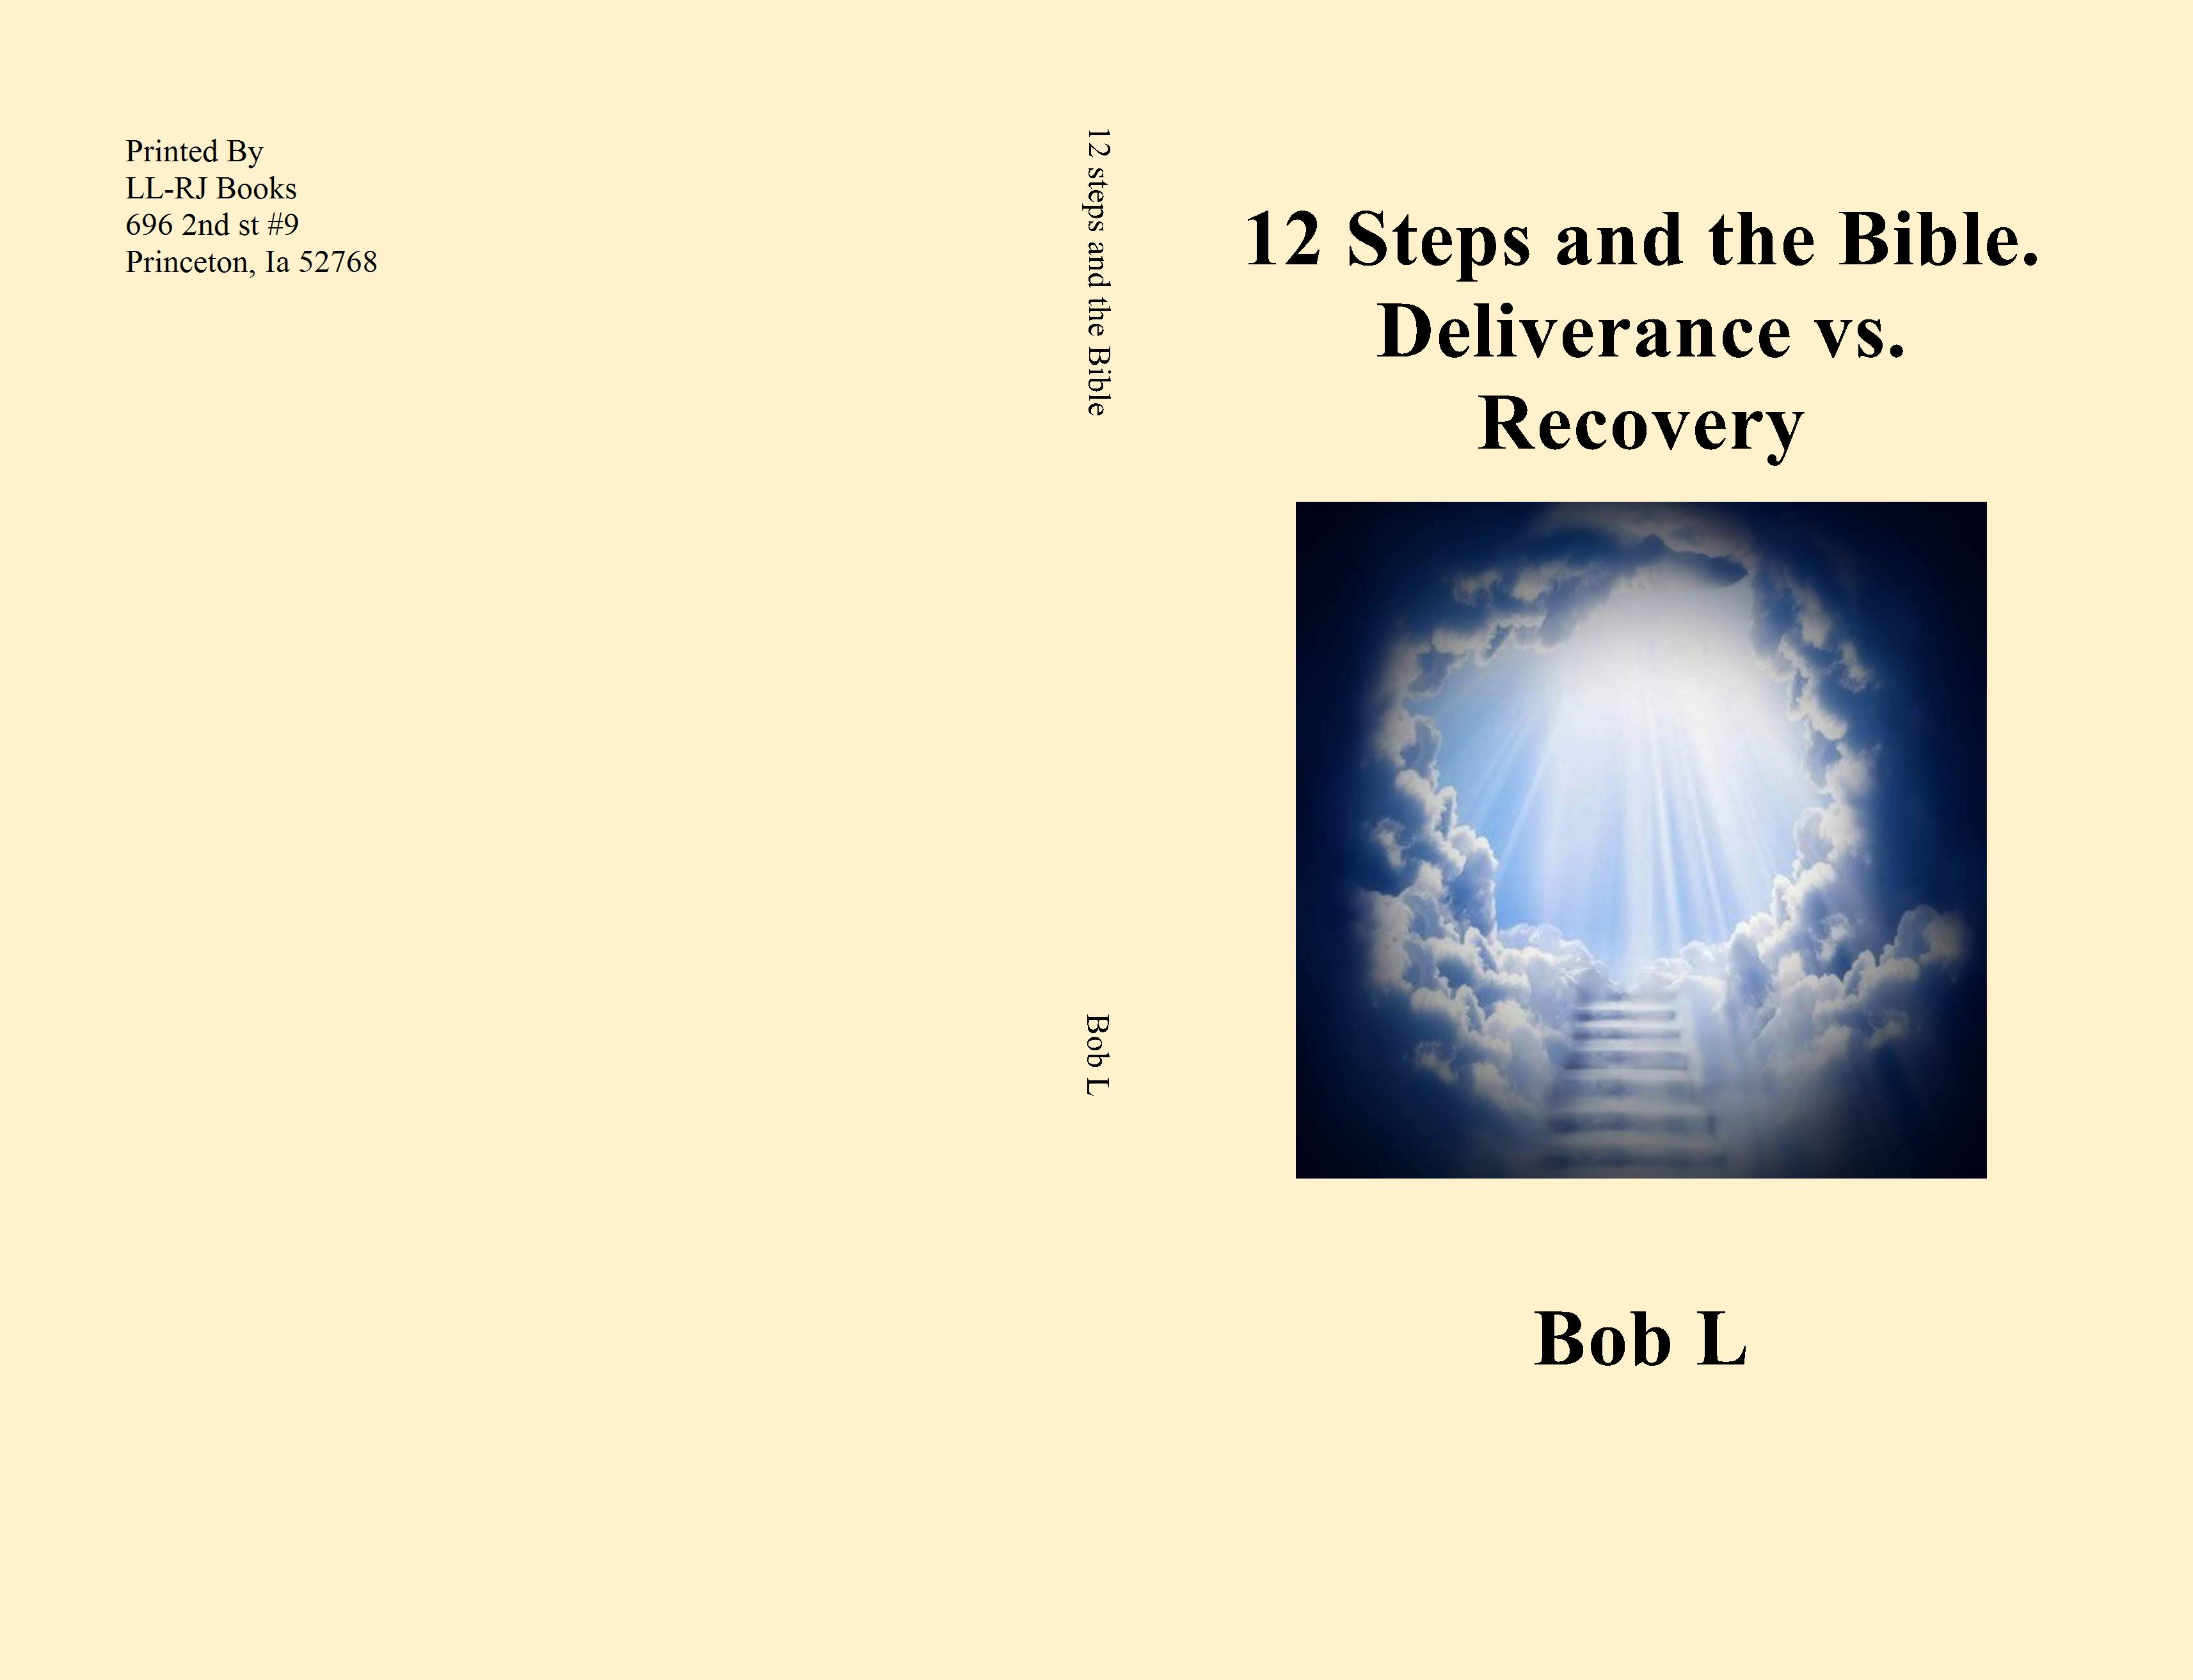 12 steps and the bible cover image